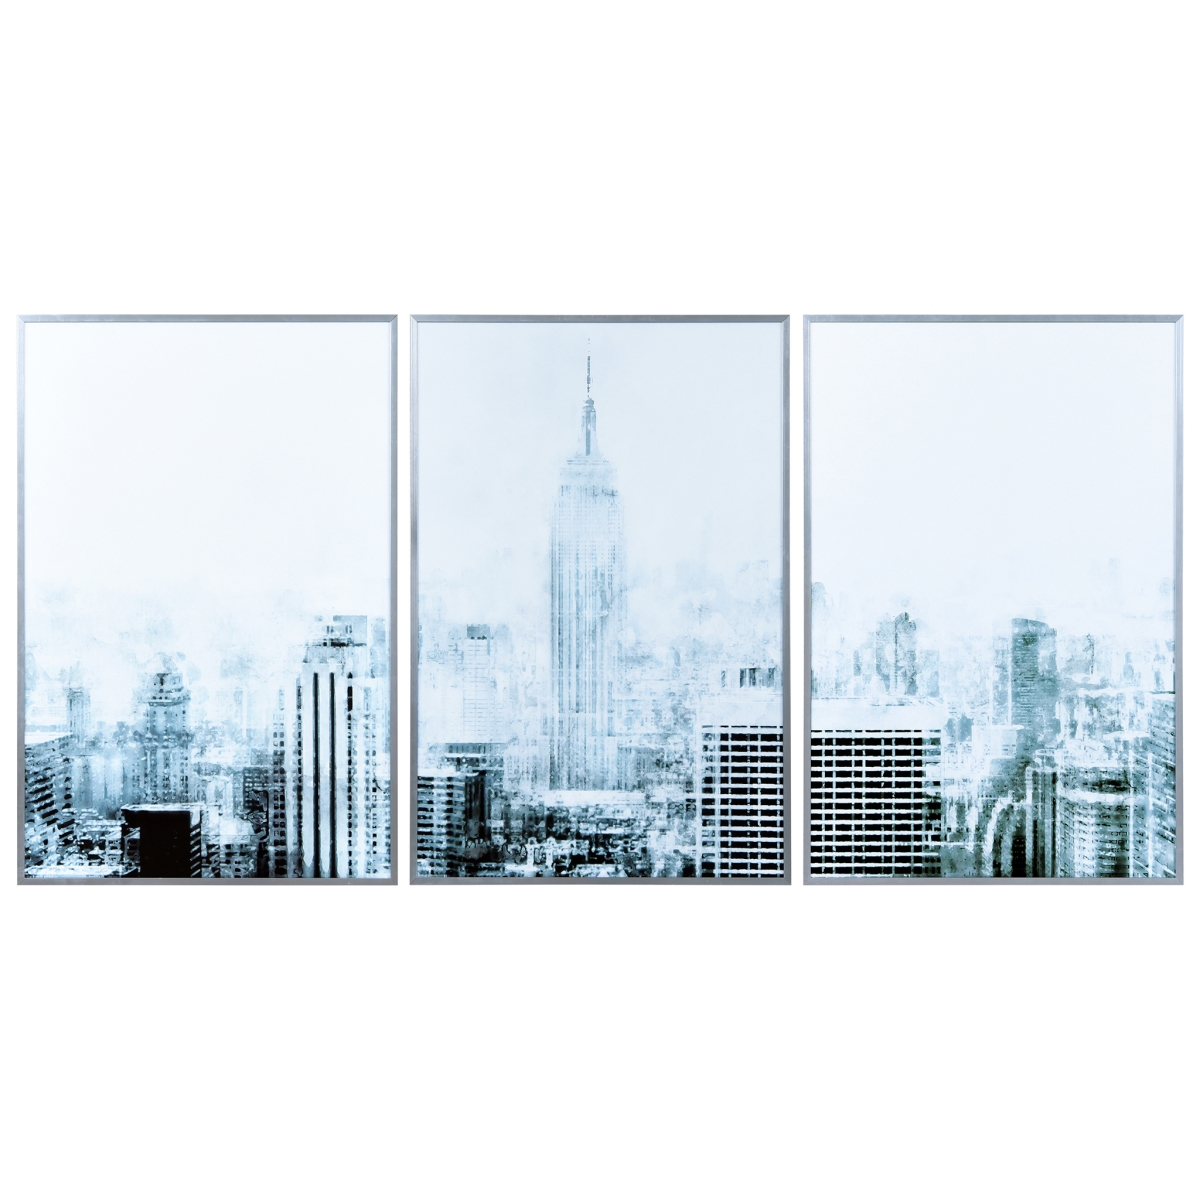 Aags-80124-2416-3 24 X 16 In. Empire State Building Reverse Printed Glass & Anodized Aluminum Silver Frame Contemporary Wall Art, 3 Piece